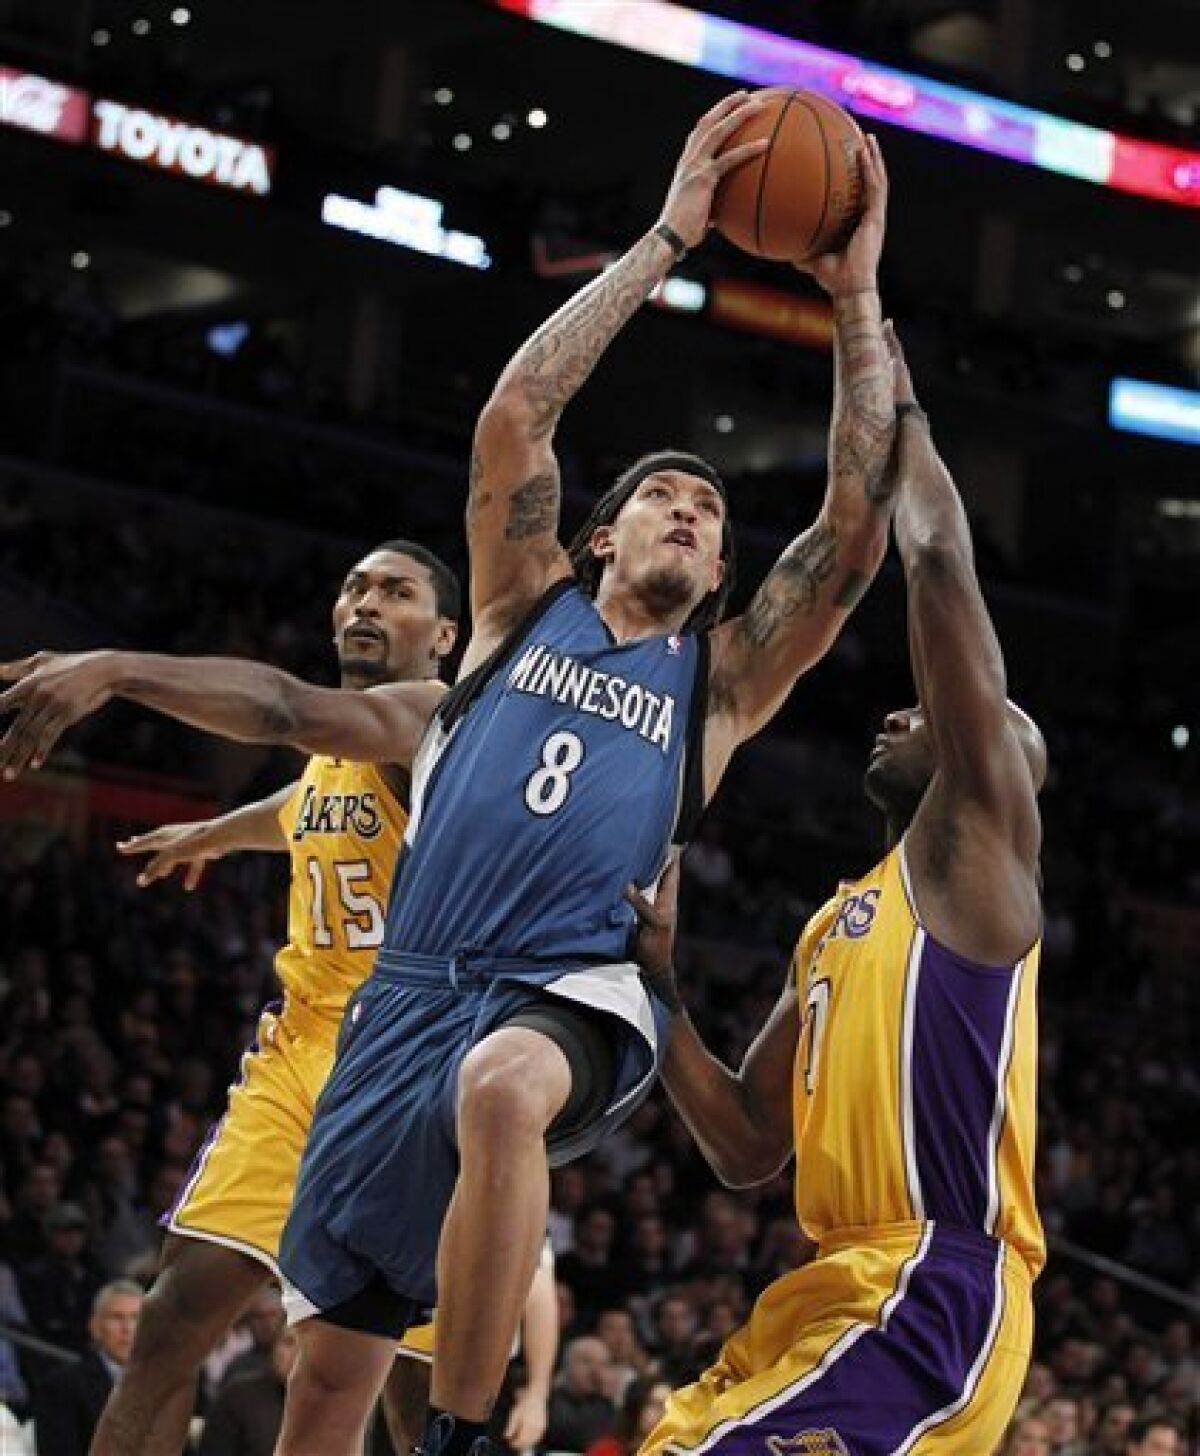 Minnesota Timberwolves forward Michael Beasley, center, drives to the basket as he is defended by Los Angeles Lakers' Ron Artest, left, and Lamar Odom during the first half of an NBA basketball game in Los Angeles, Tuesday, Nov. 9, 2010. (AP Photo/Jae C. Hong)